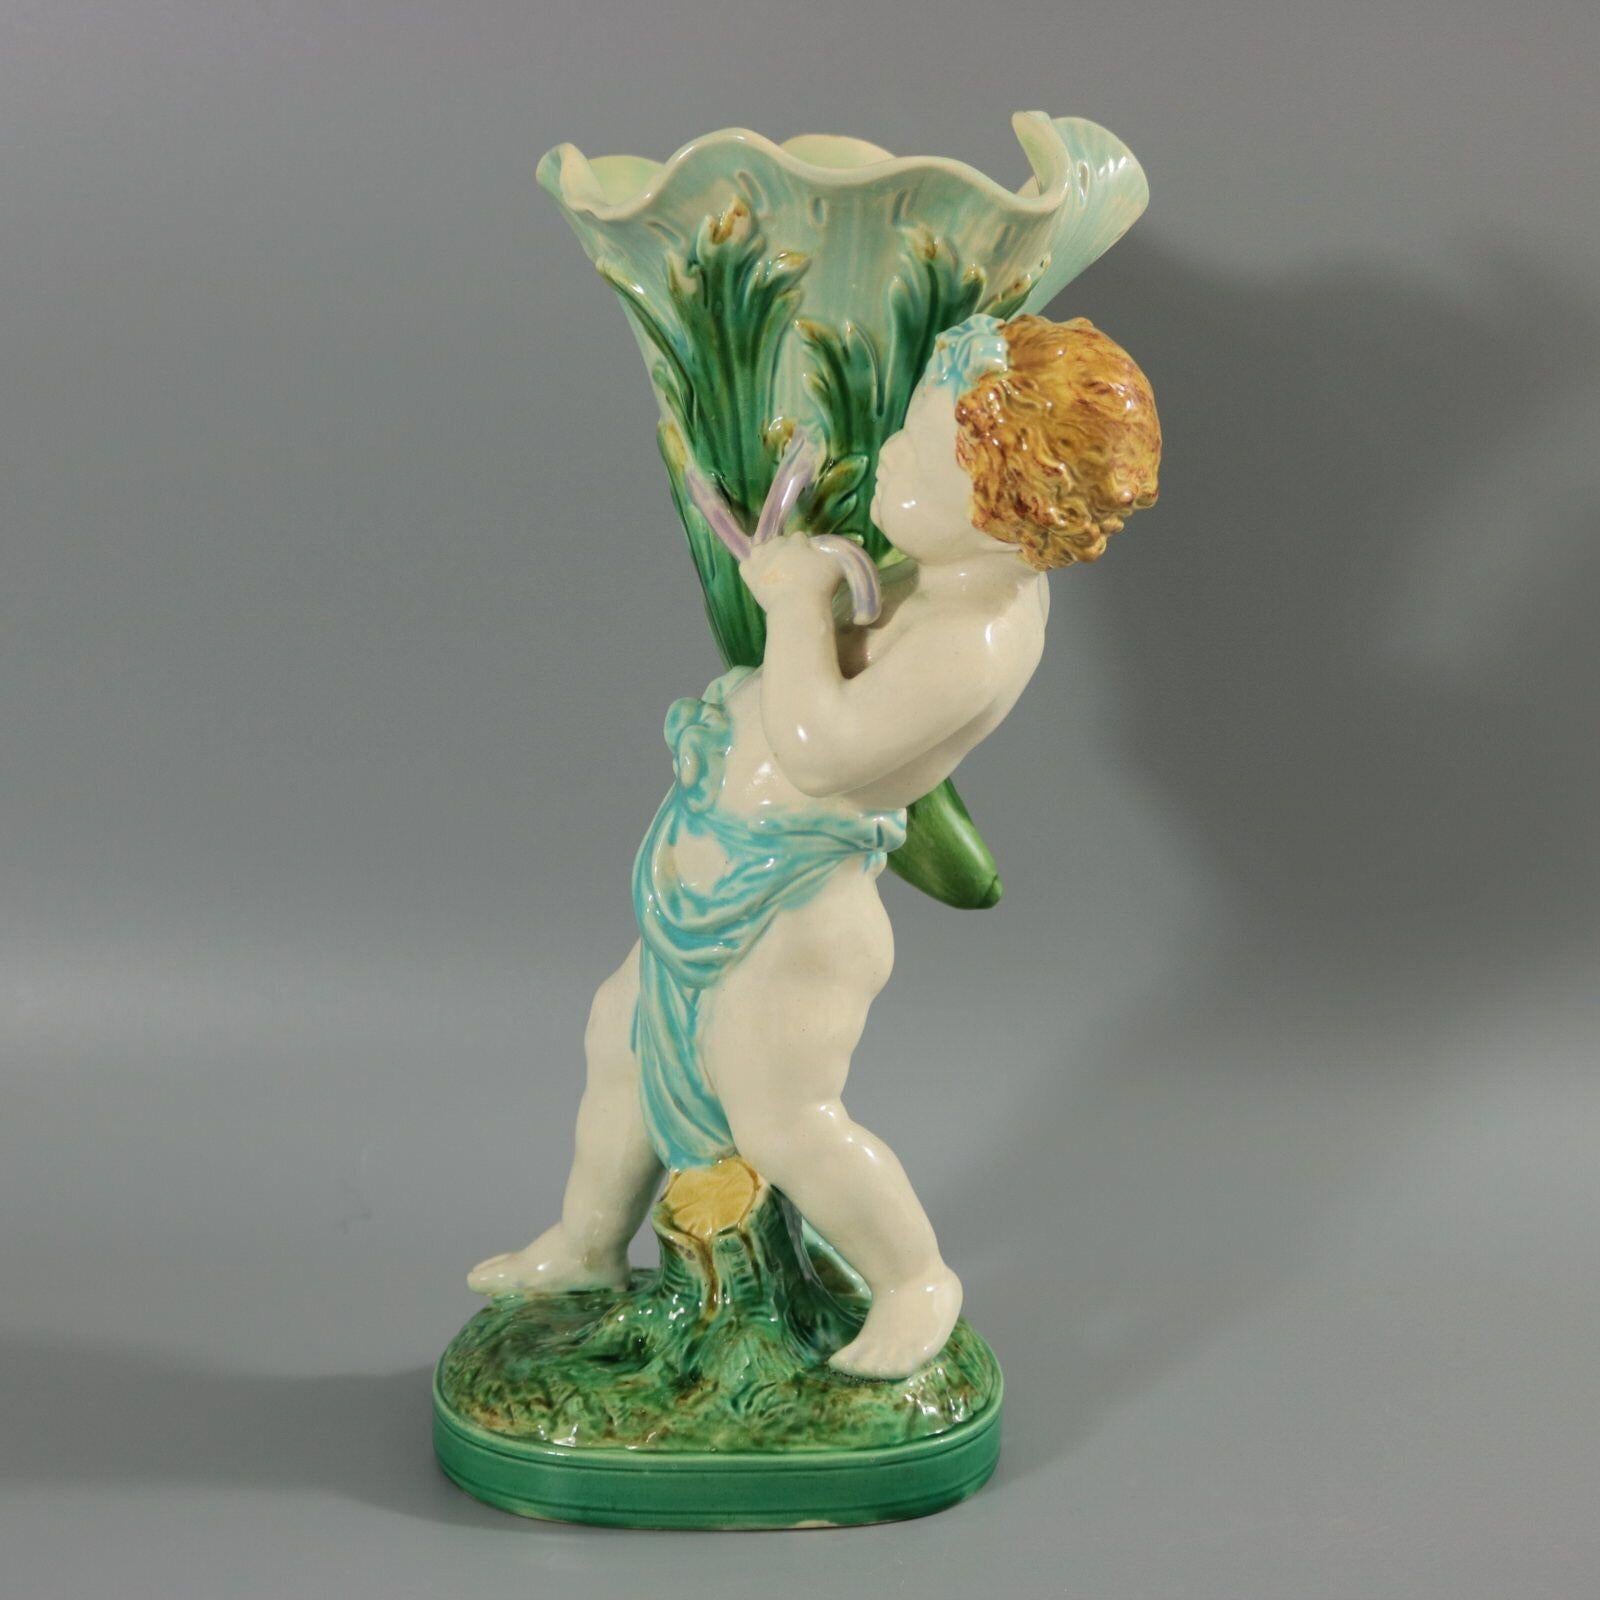 Minton Majolica flower holder which features a putti wearing drapes, carrying a cornucopia vase. Colouration: green, turquoise, white, are predominant. The piece bears maker's marks for the Minton pottery. Bears a pattern number, '3118'. Marks